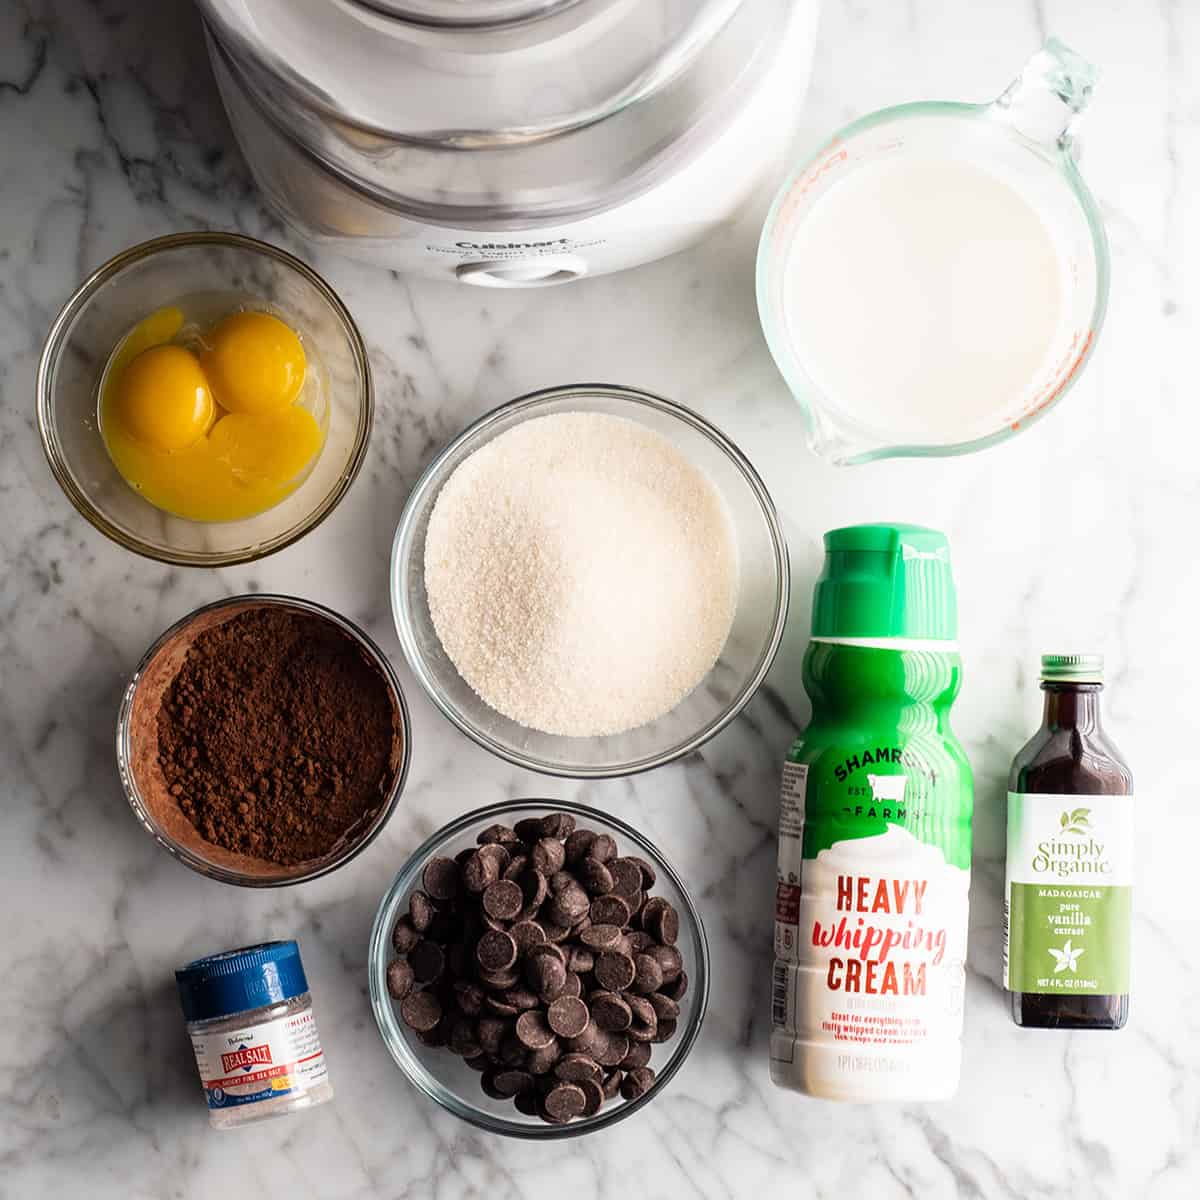 Overhead view of the ingredients in this chocolate ice cream recipe